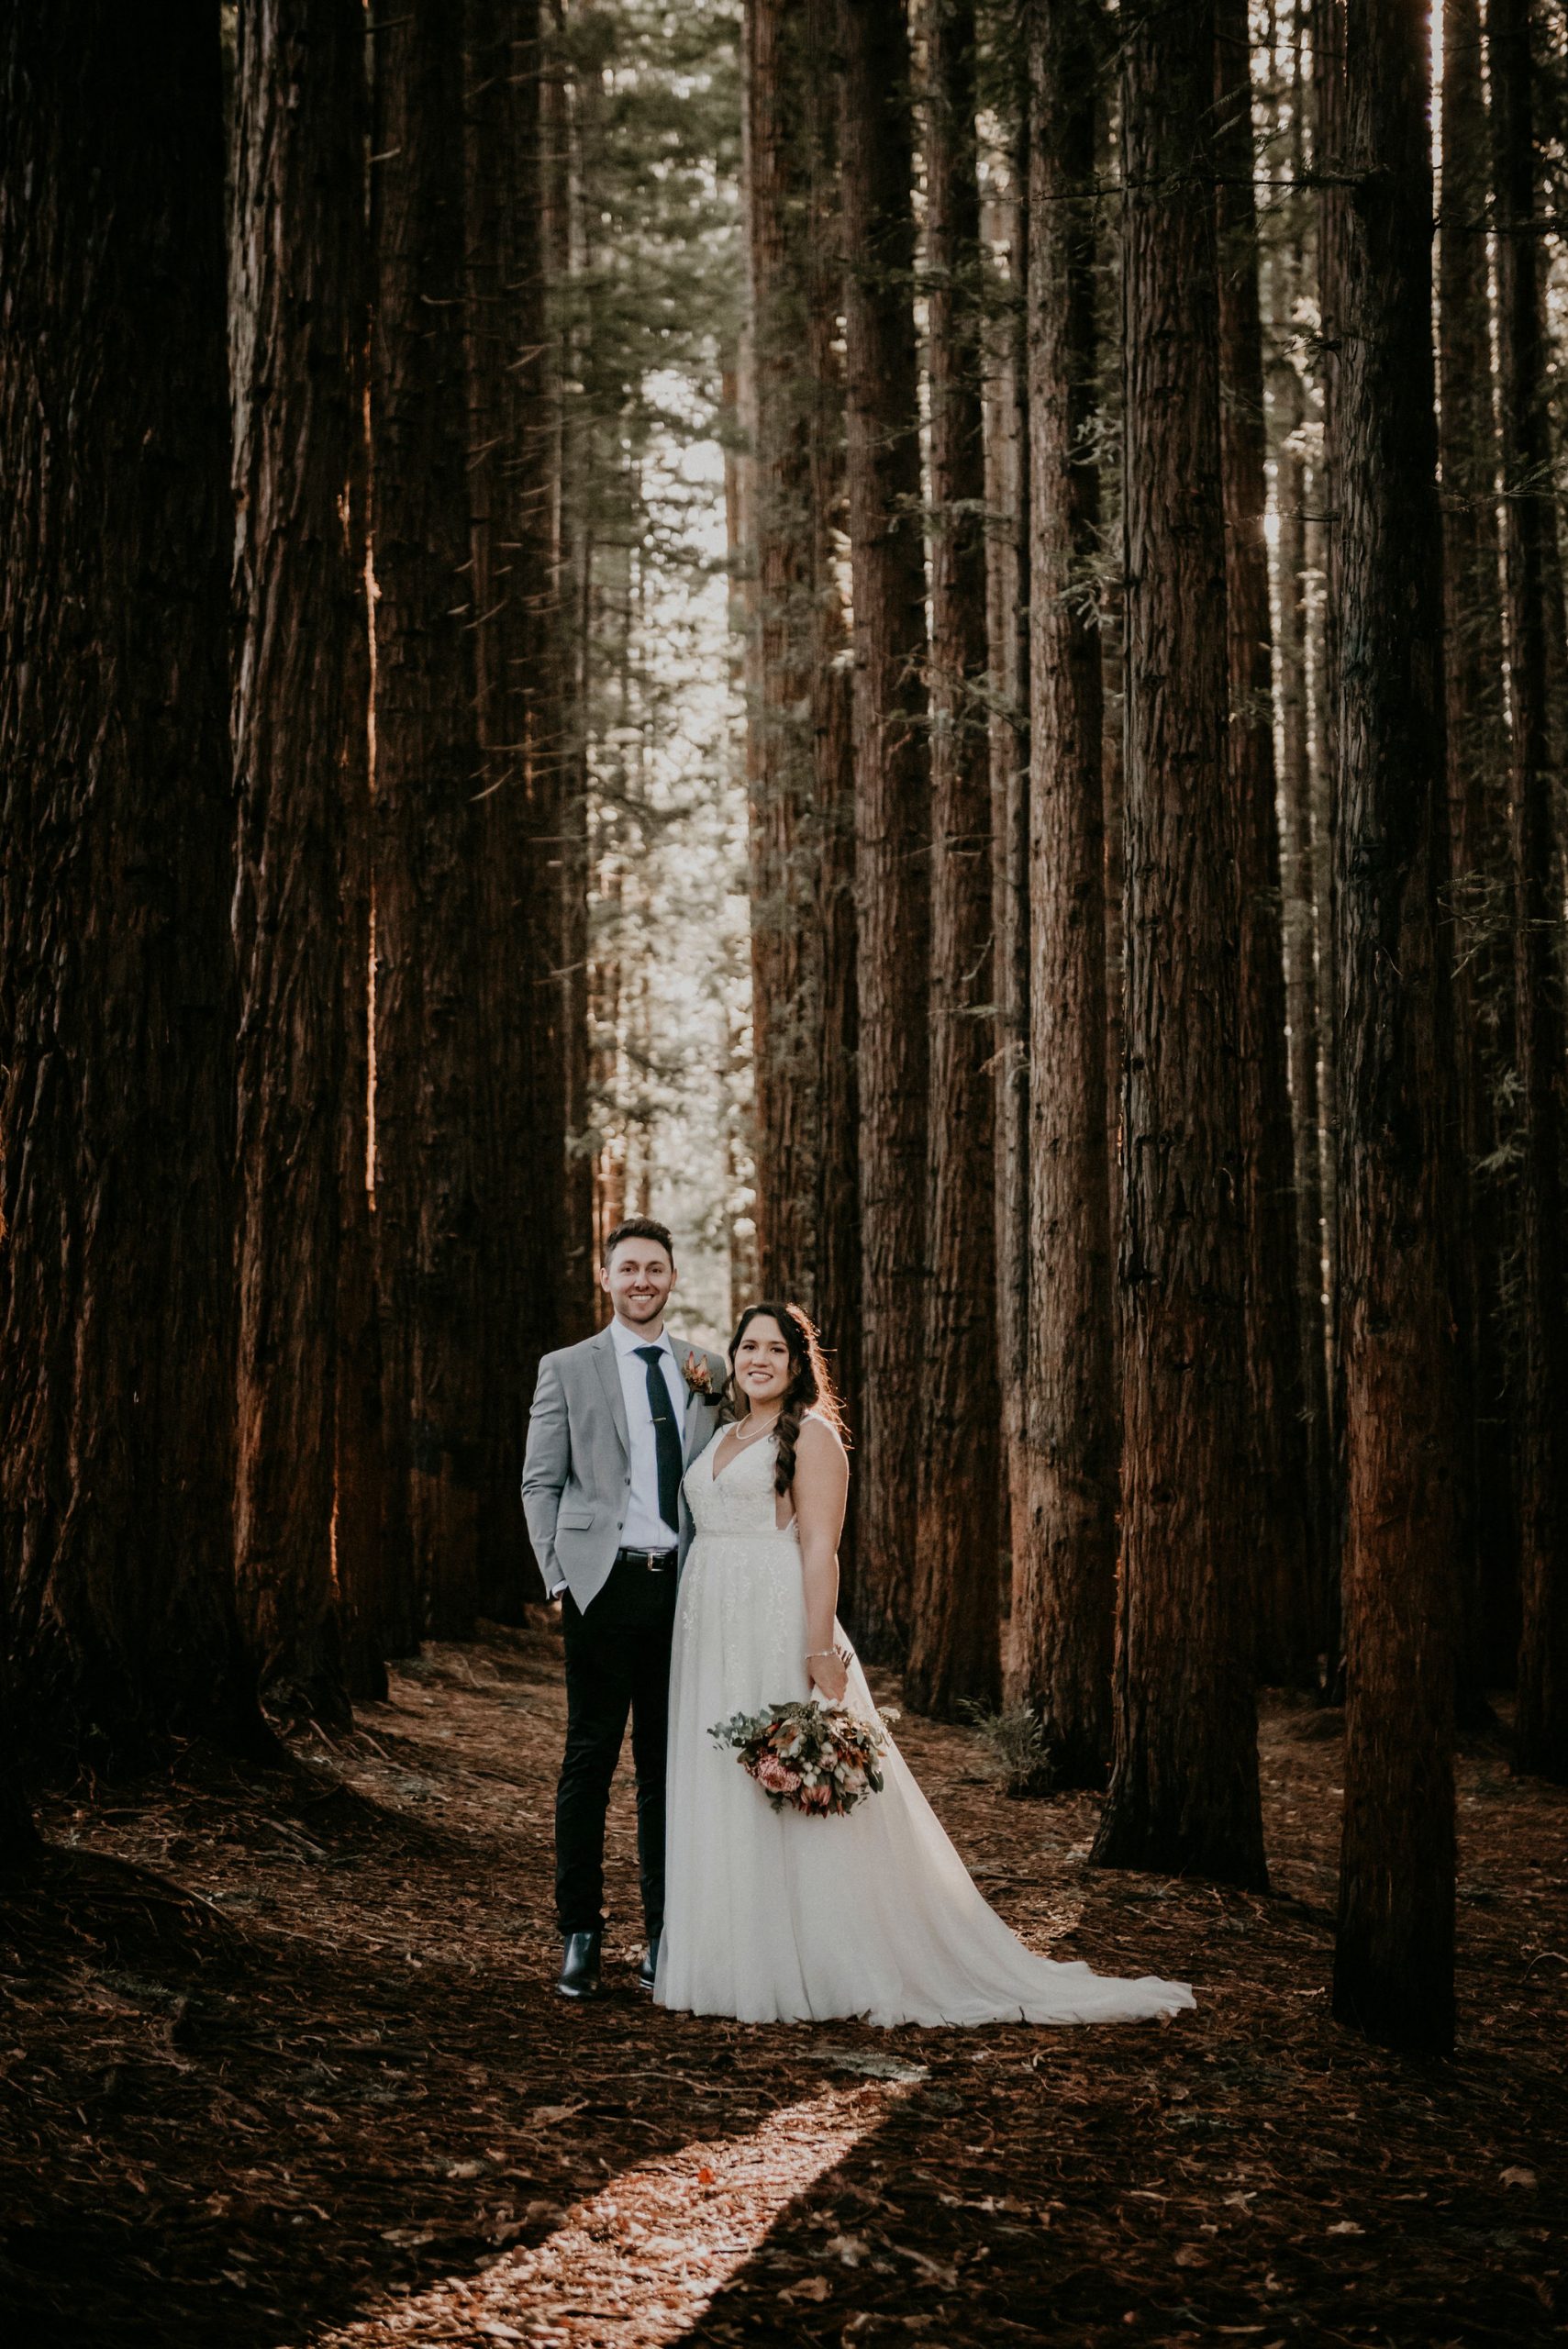 Lets-Elope-Melbourne-Celebrant-Photographer-Elopement-Package-Victoria-Sarah-Matler-Photography-Videography-Video-Warburton-Redwood-Forest-weddings-intimate-16